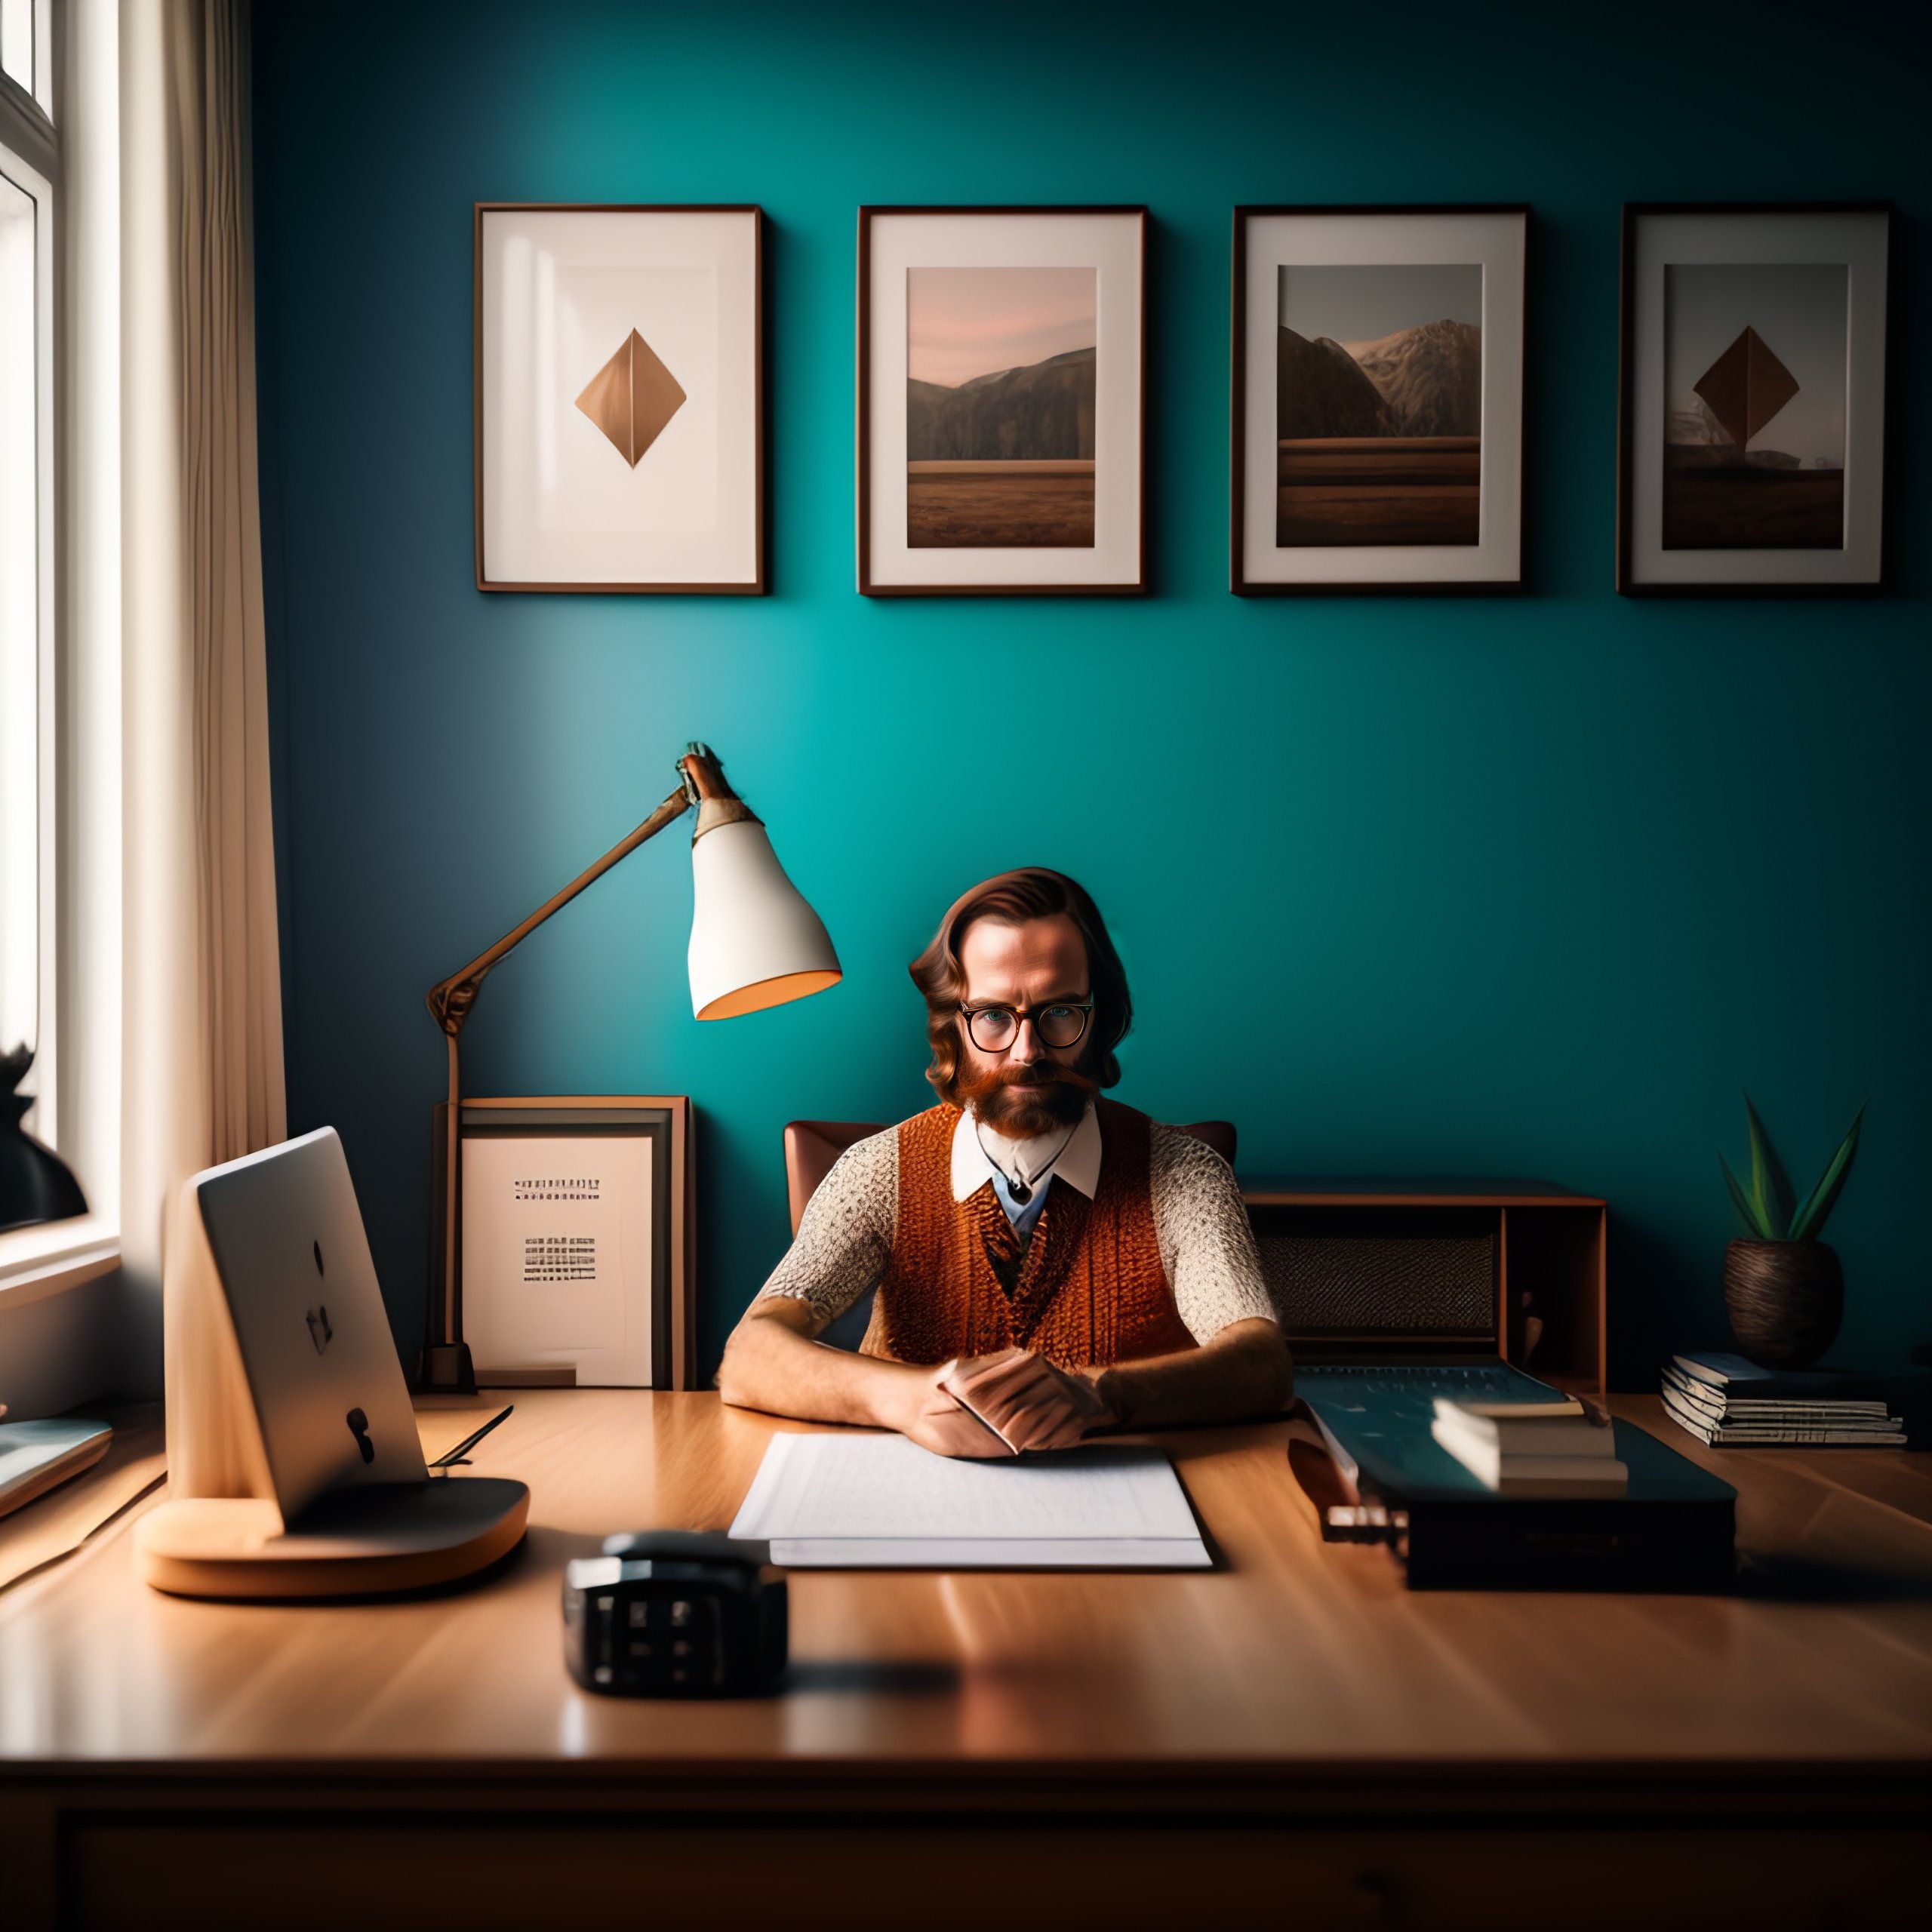 Lexica - Photography of a man sitting on his desk, wes Anderson style